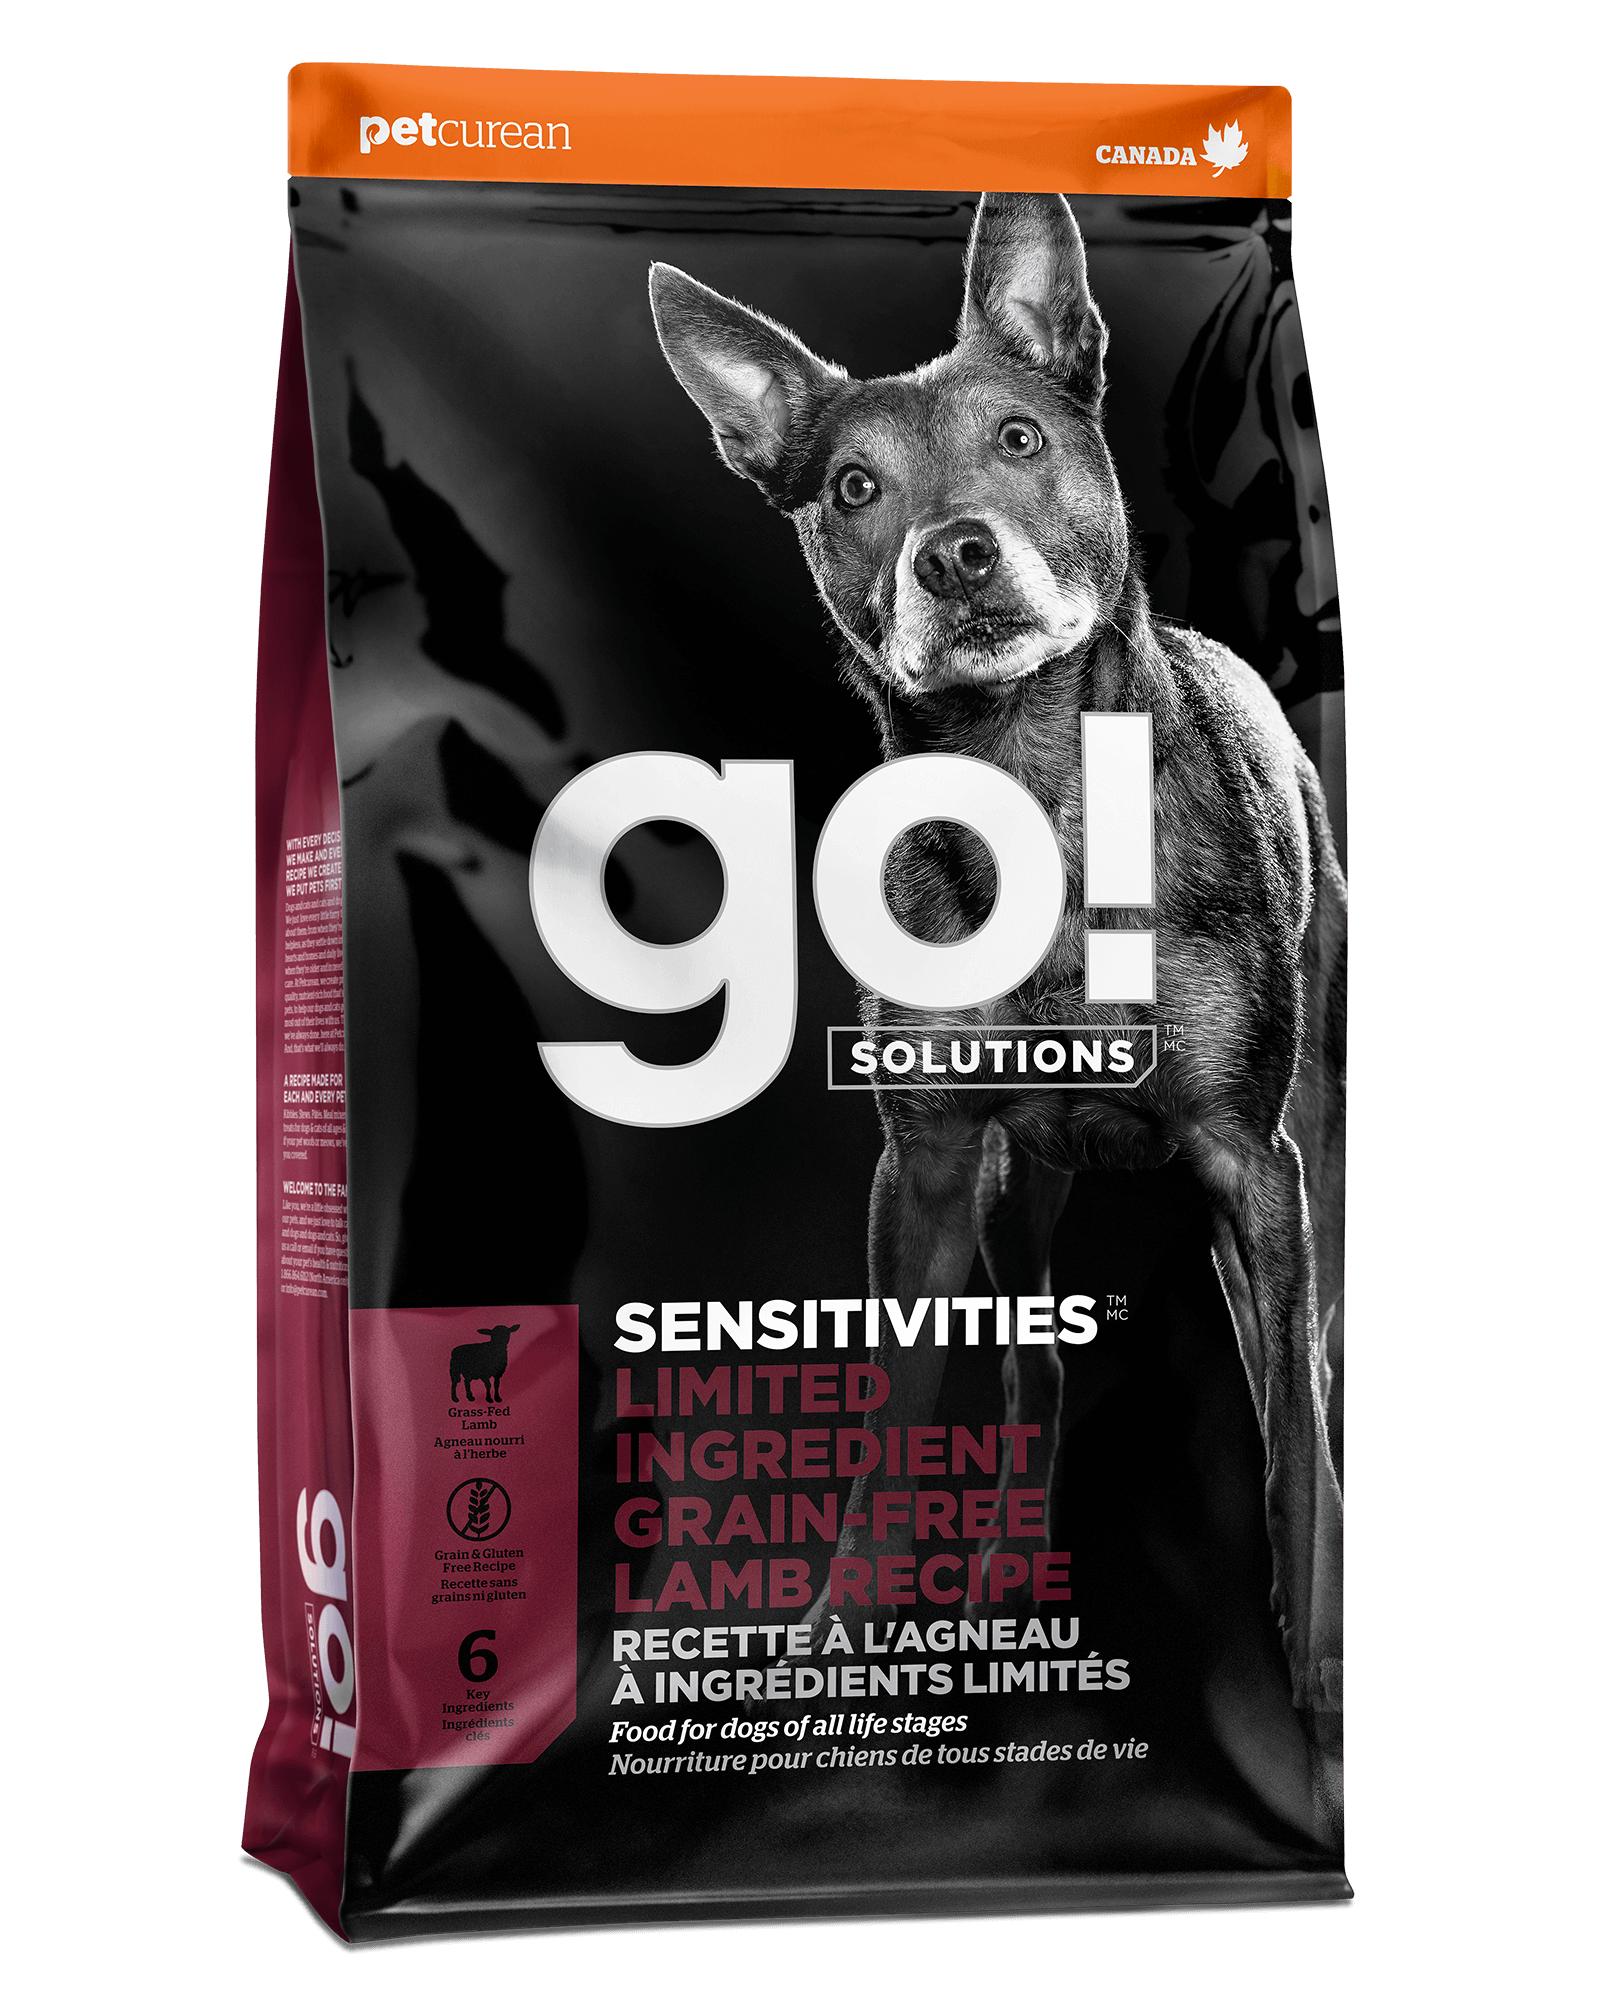 GO! SENSITIVITIES Limited Ingredient Grain Free Lamb Recipe for Dogs